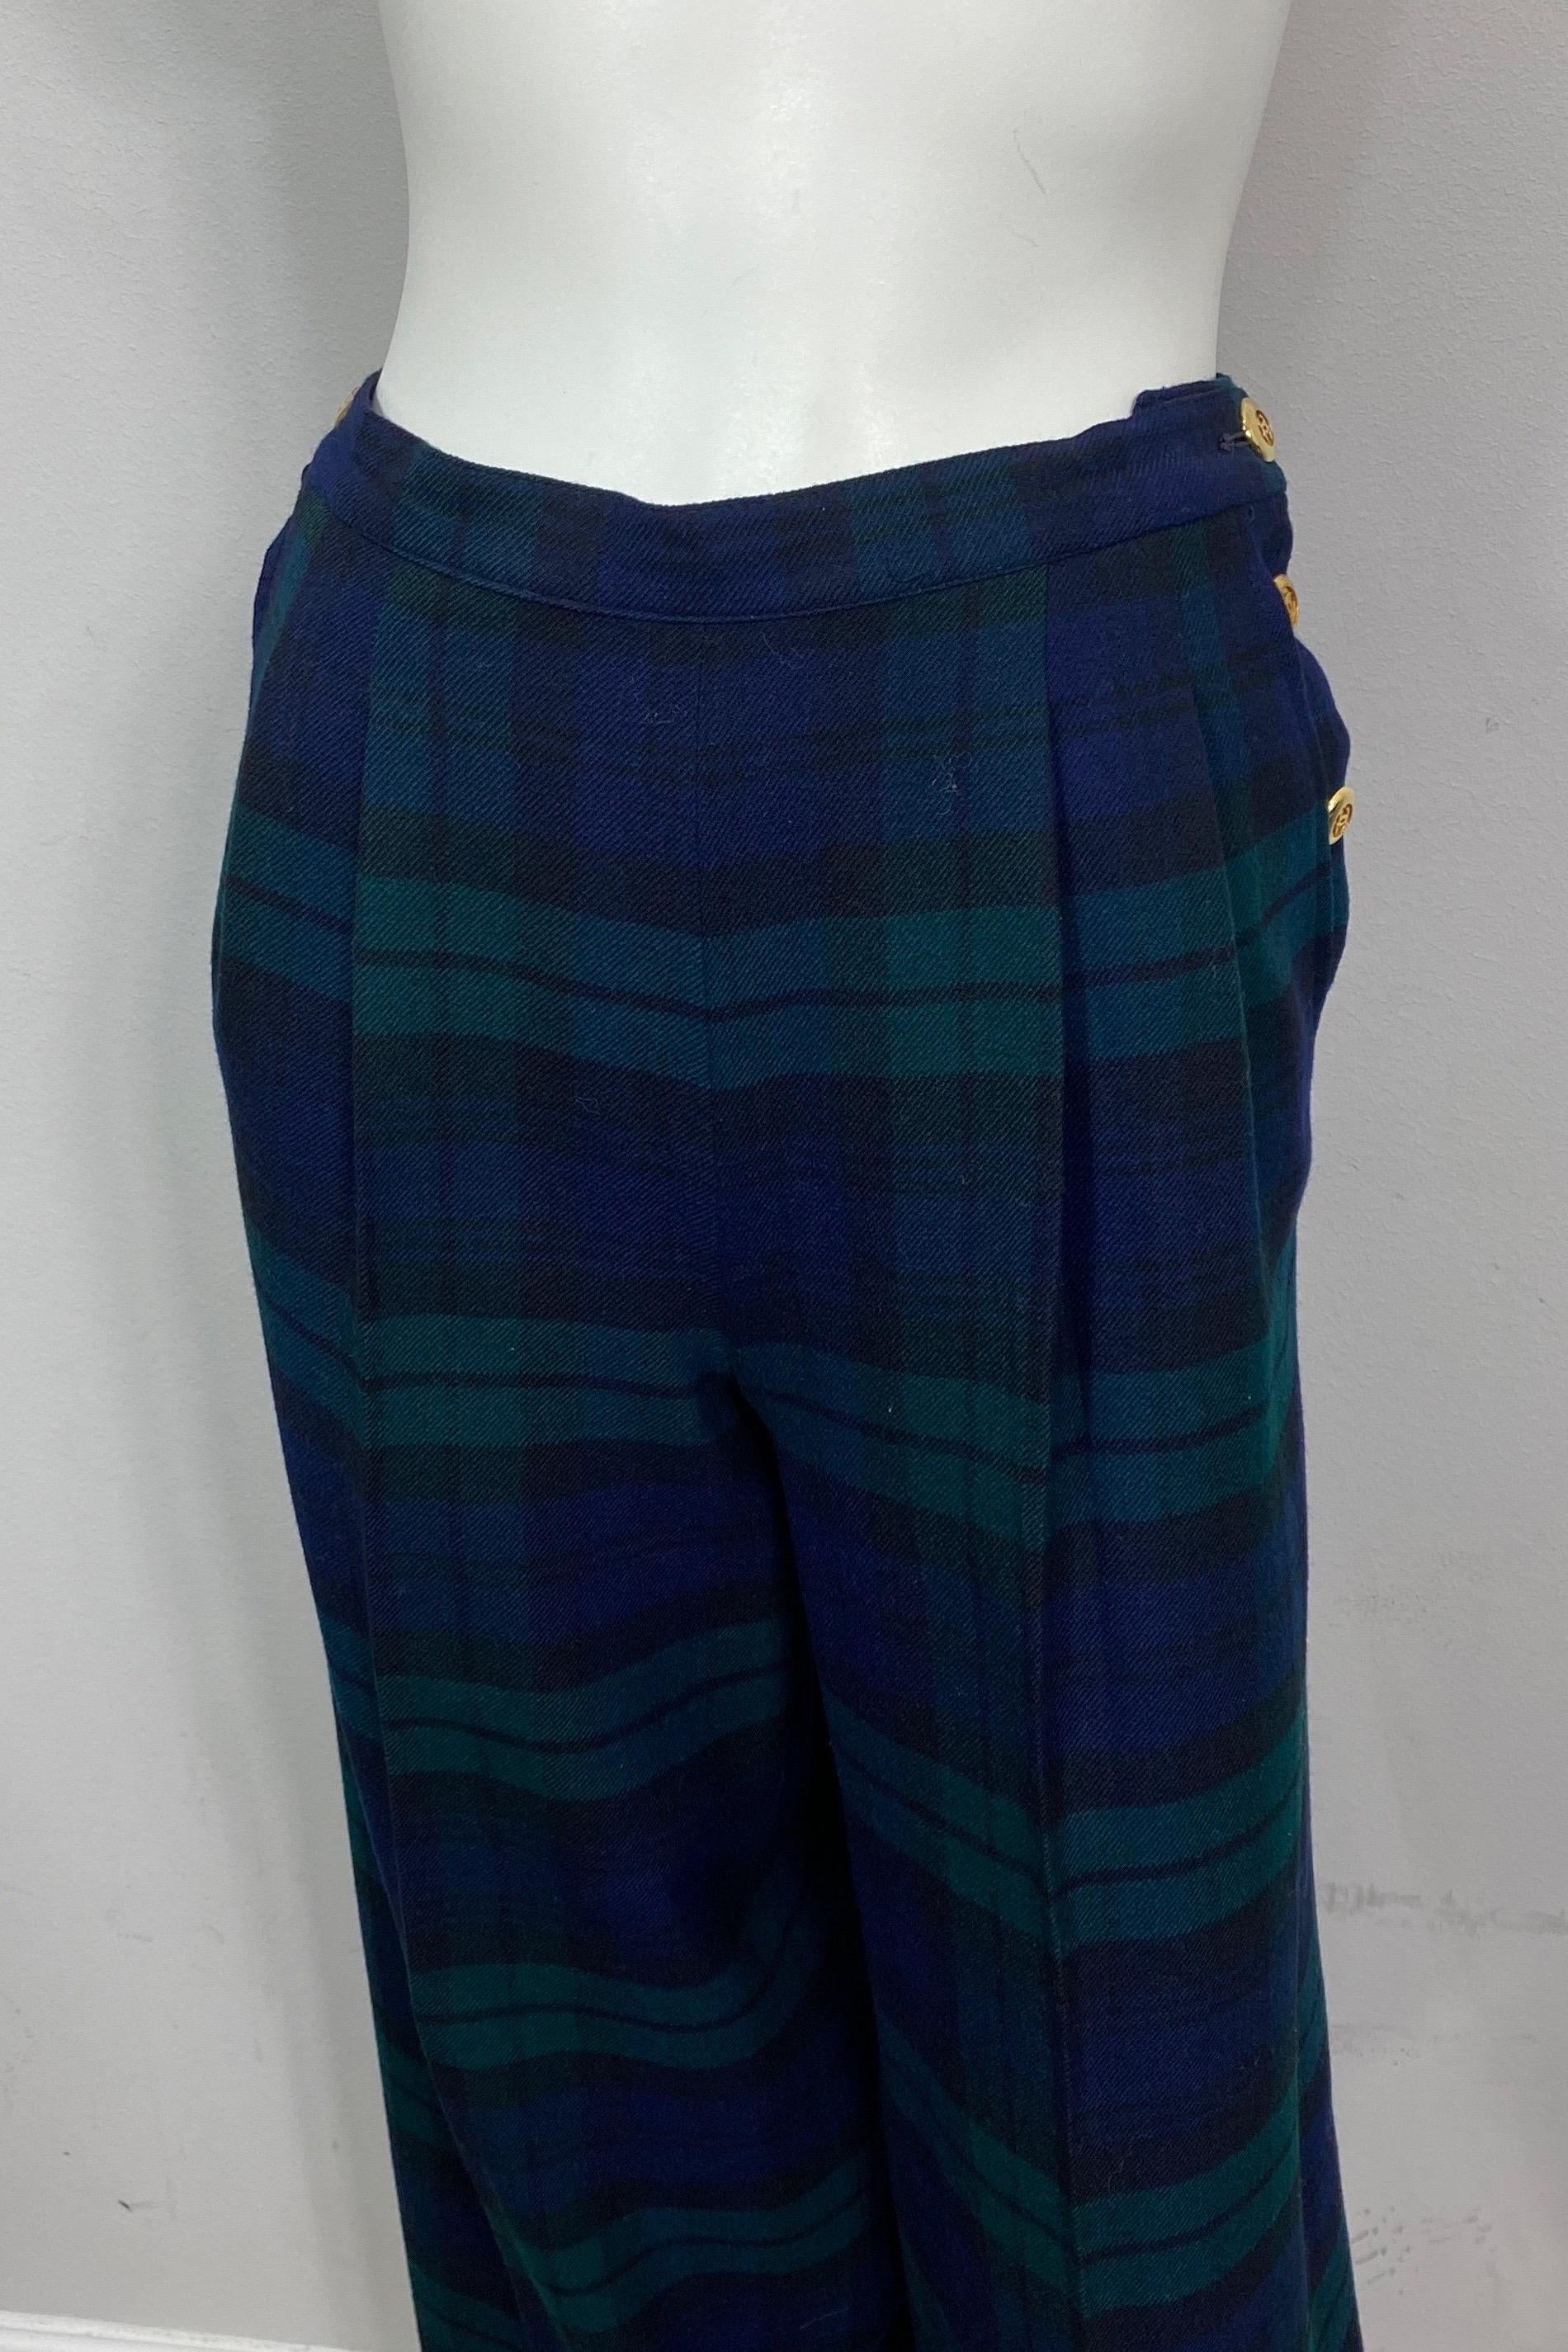 Chanel Mid 1980’s Navy and Green Plaid Double Pleated Wool Pants-Size 36 In Excellent Condition For Sale In West Palm Beach, FL